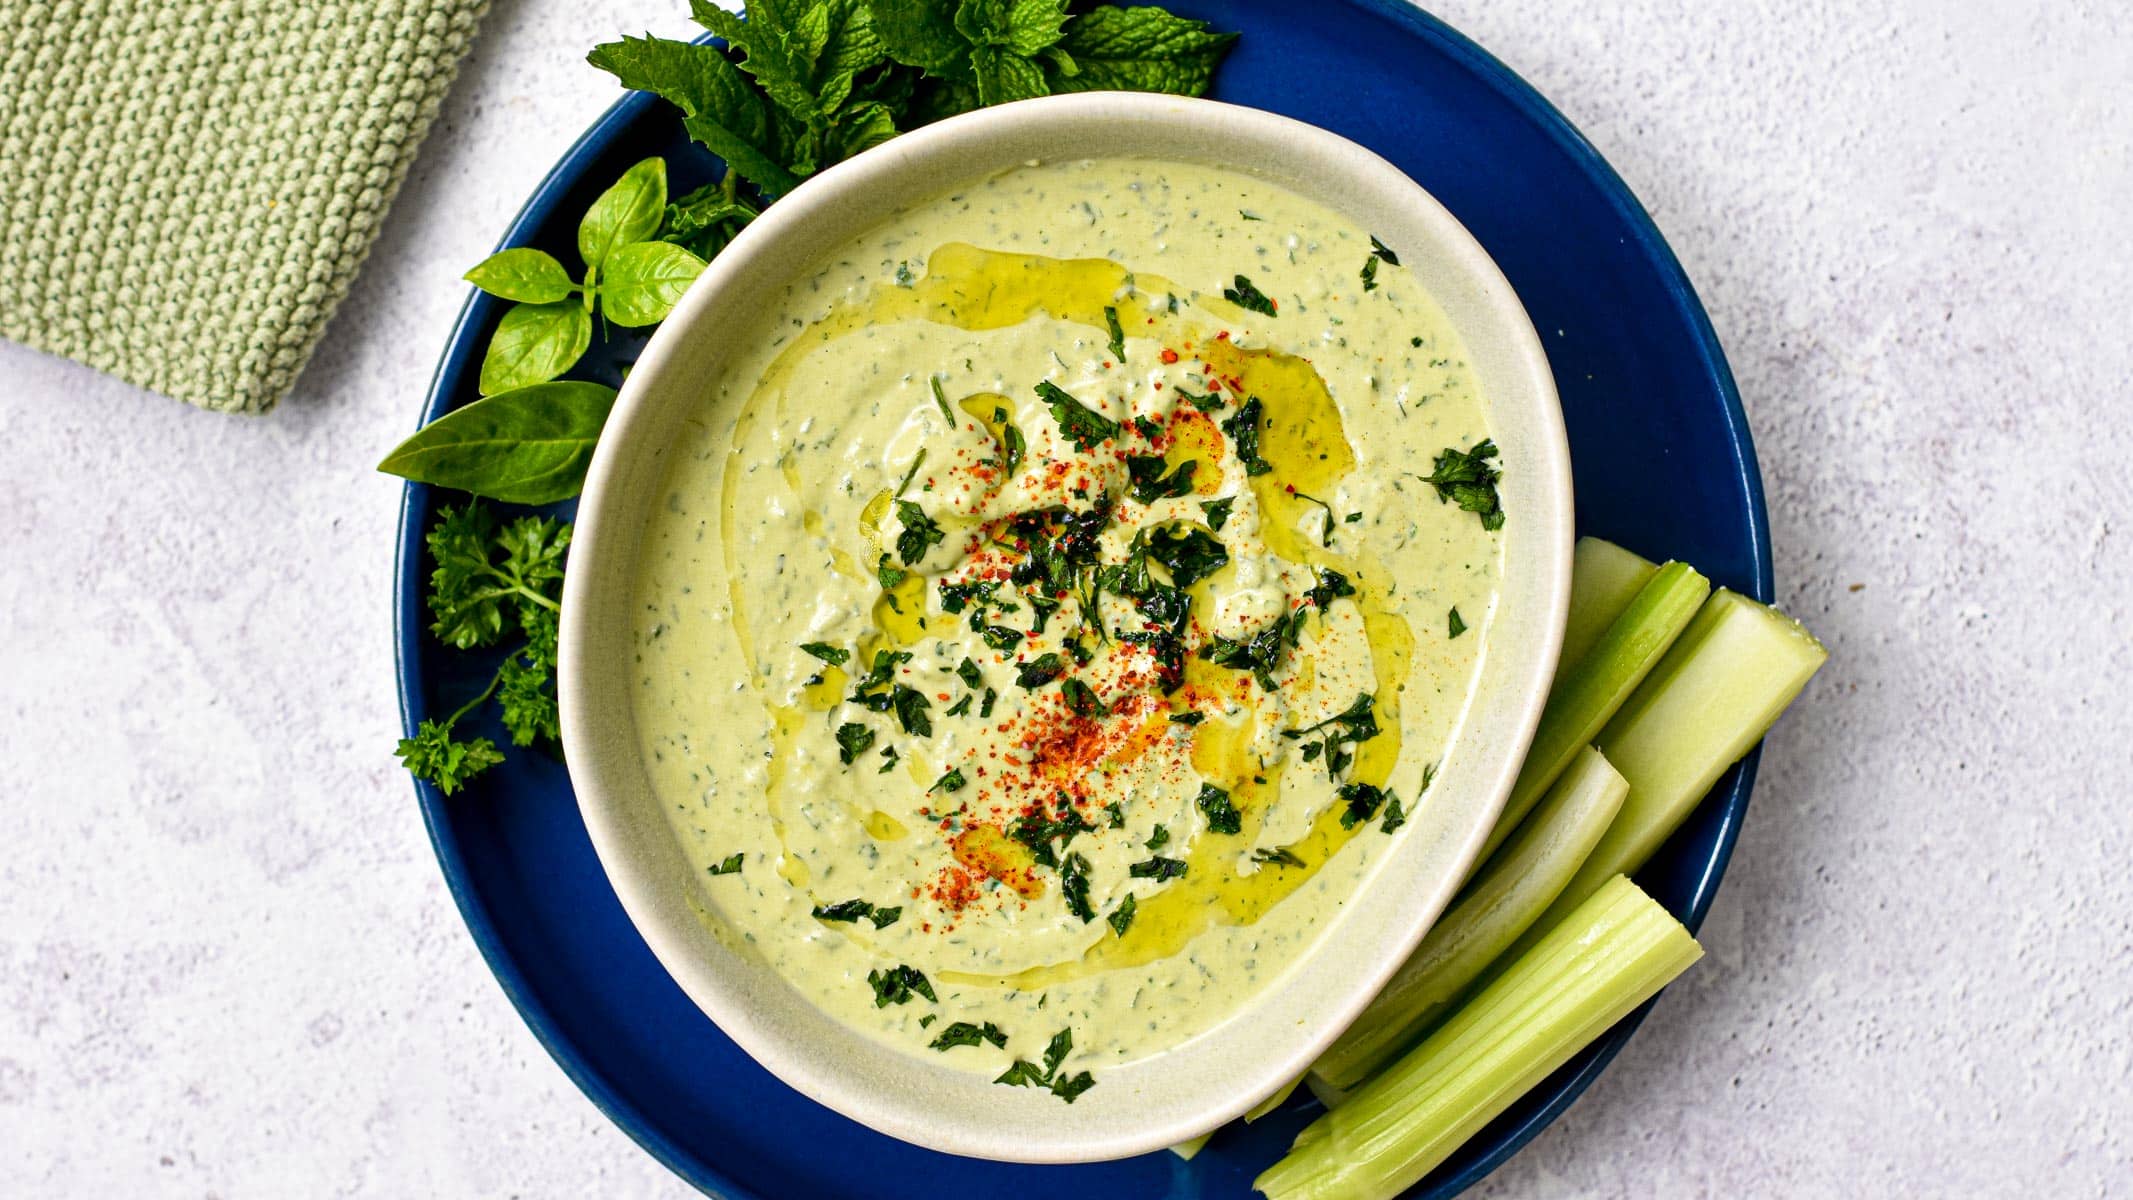 This Green Goddess Dip is a creamy refreshing yogurt feta dip packed with 5 herbs and delicious Mediterranean flavors. Plus, this easy dip recipe is also packed with protein, vegetarian and gluten-free.